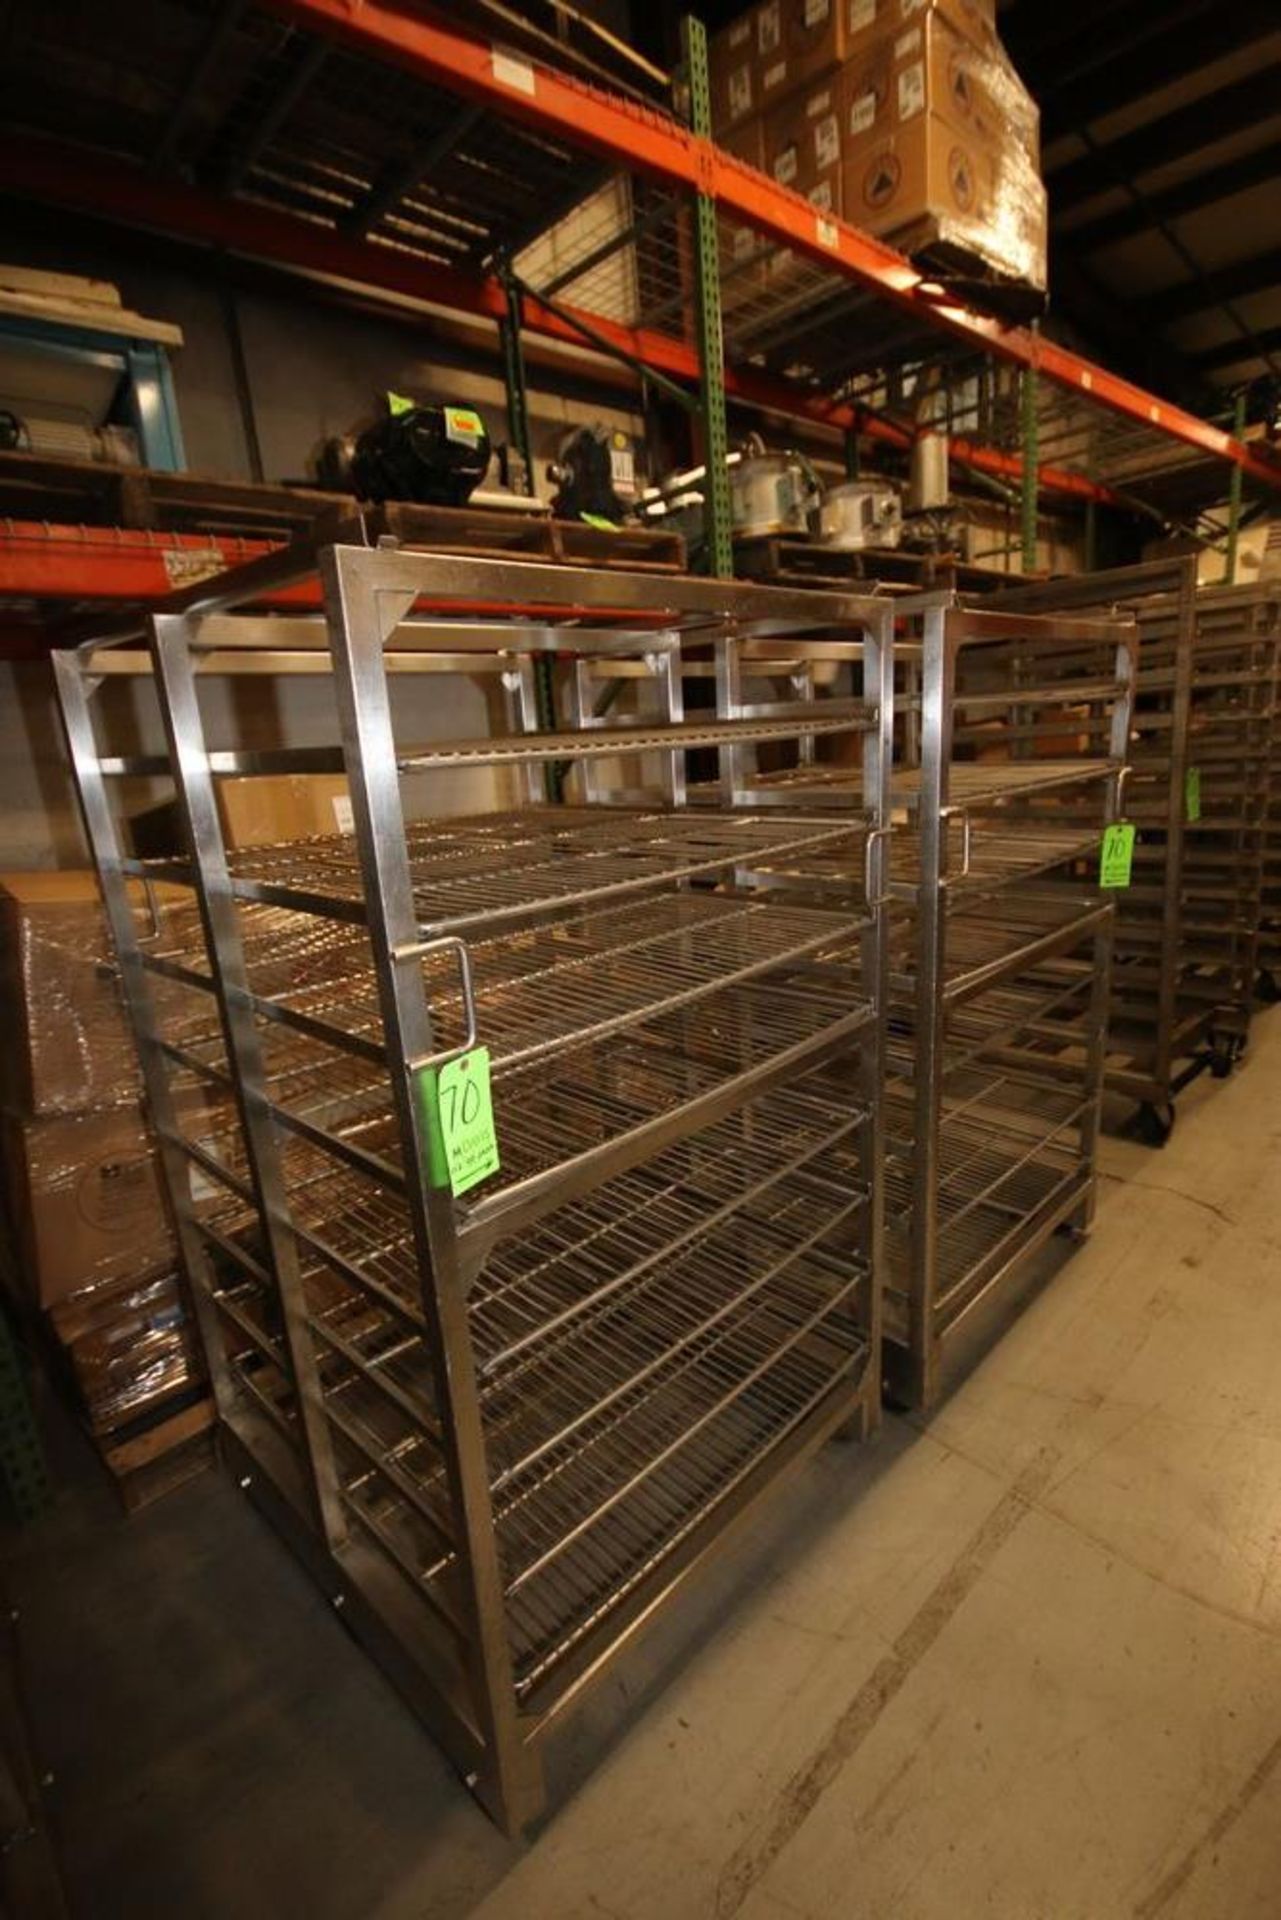 Portable S/S Racks, with (7) Shelves, Overall Dims.: Aprox. 40" L x 41" W x 71"H (LOCATED @ M. DAVIS